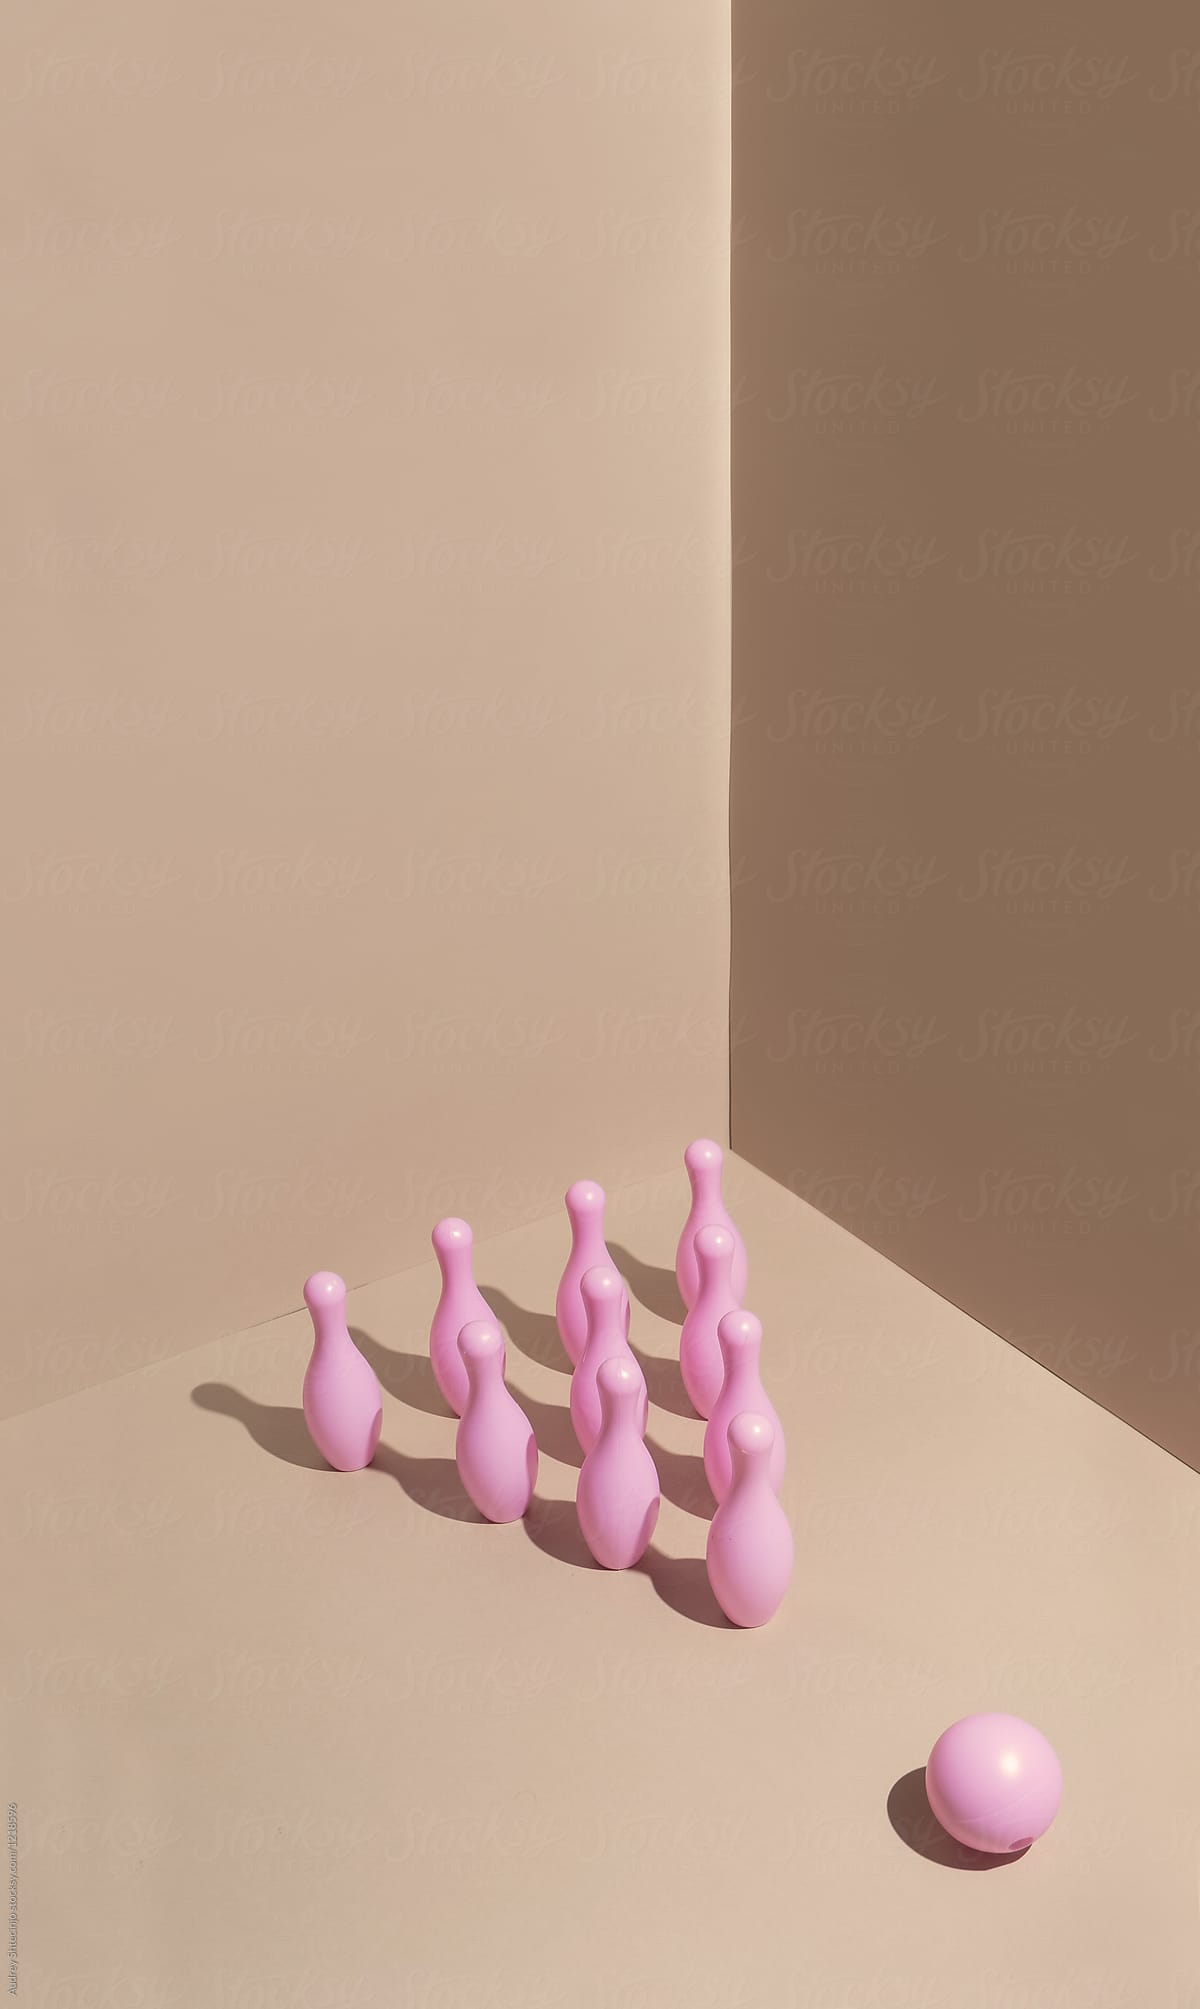 Pink bowling pins in space ready for game